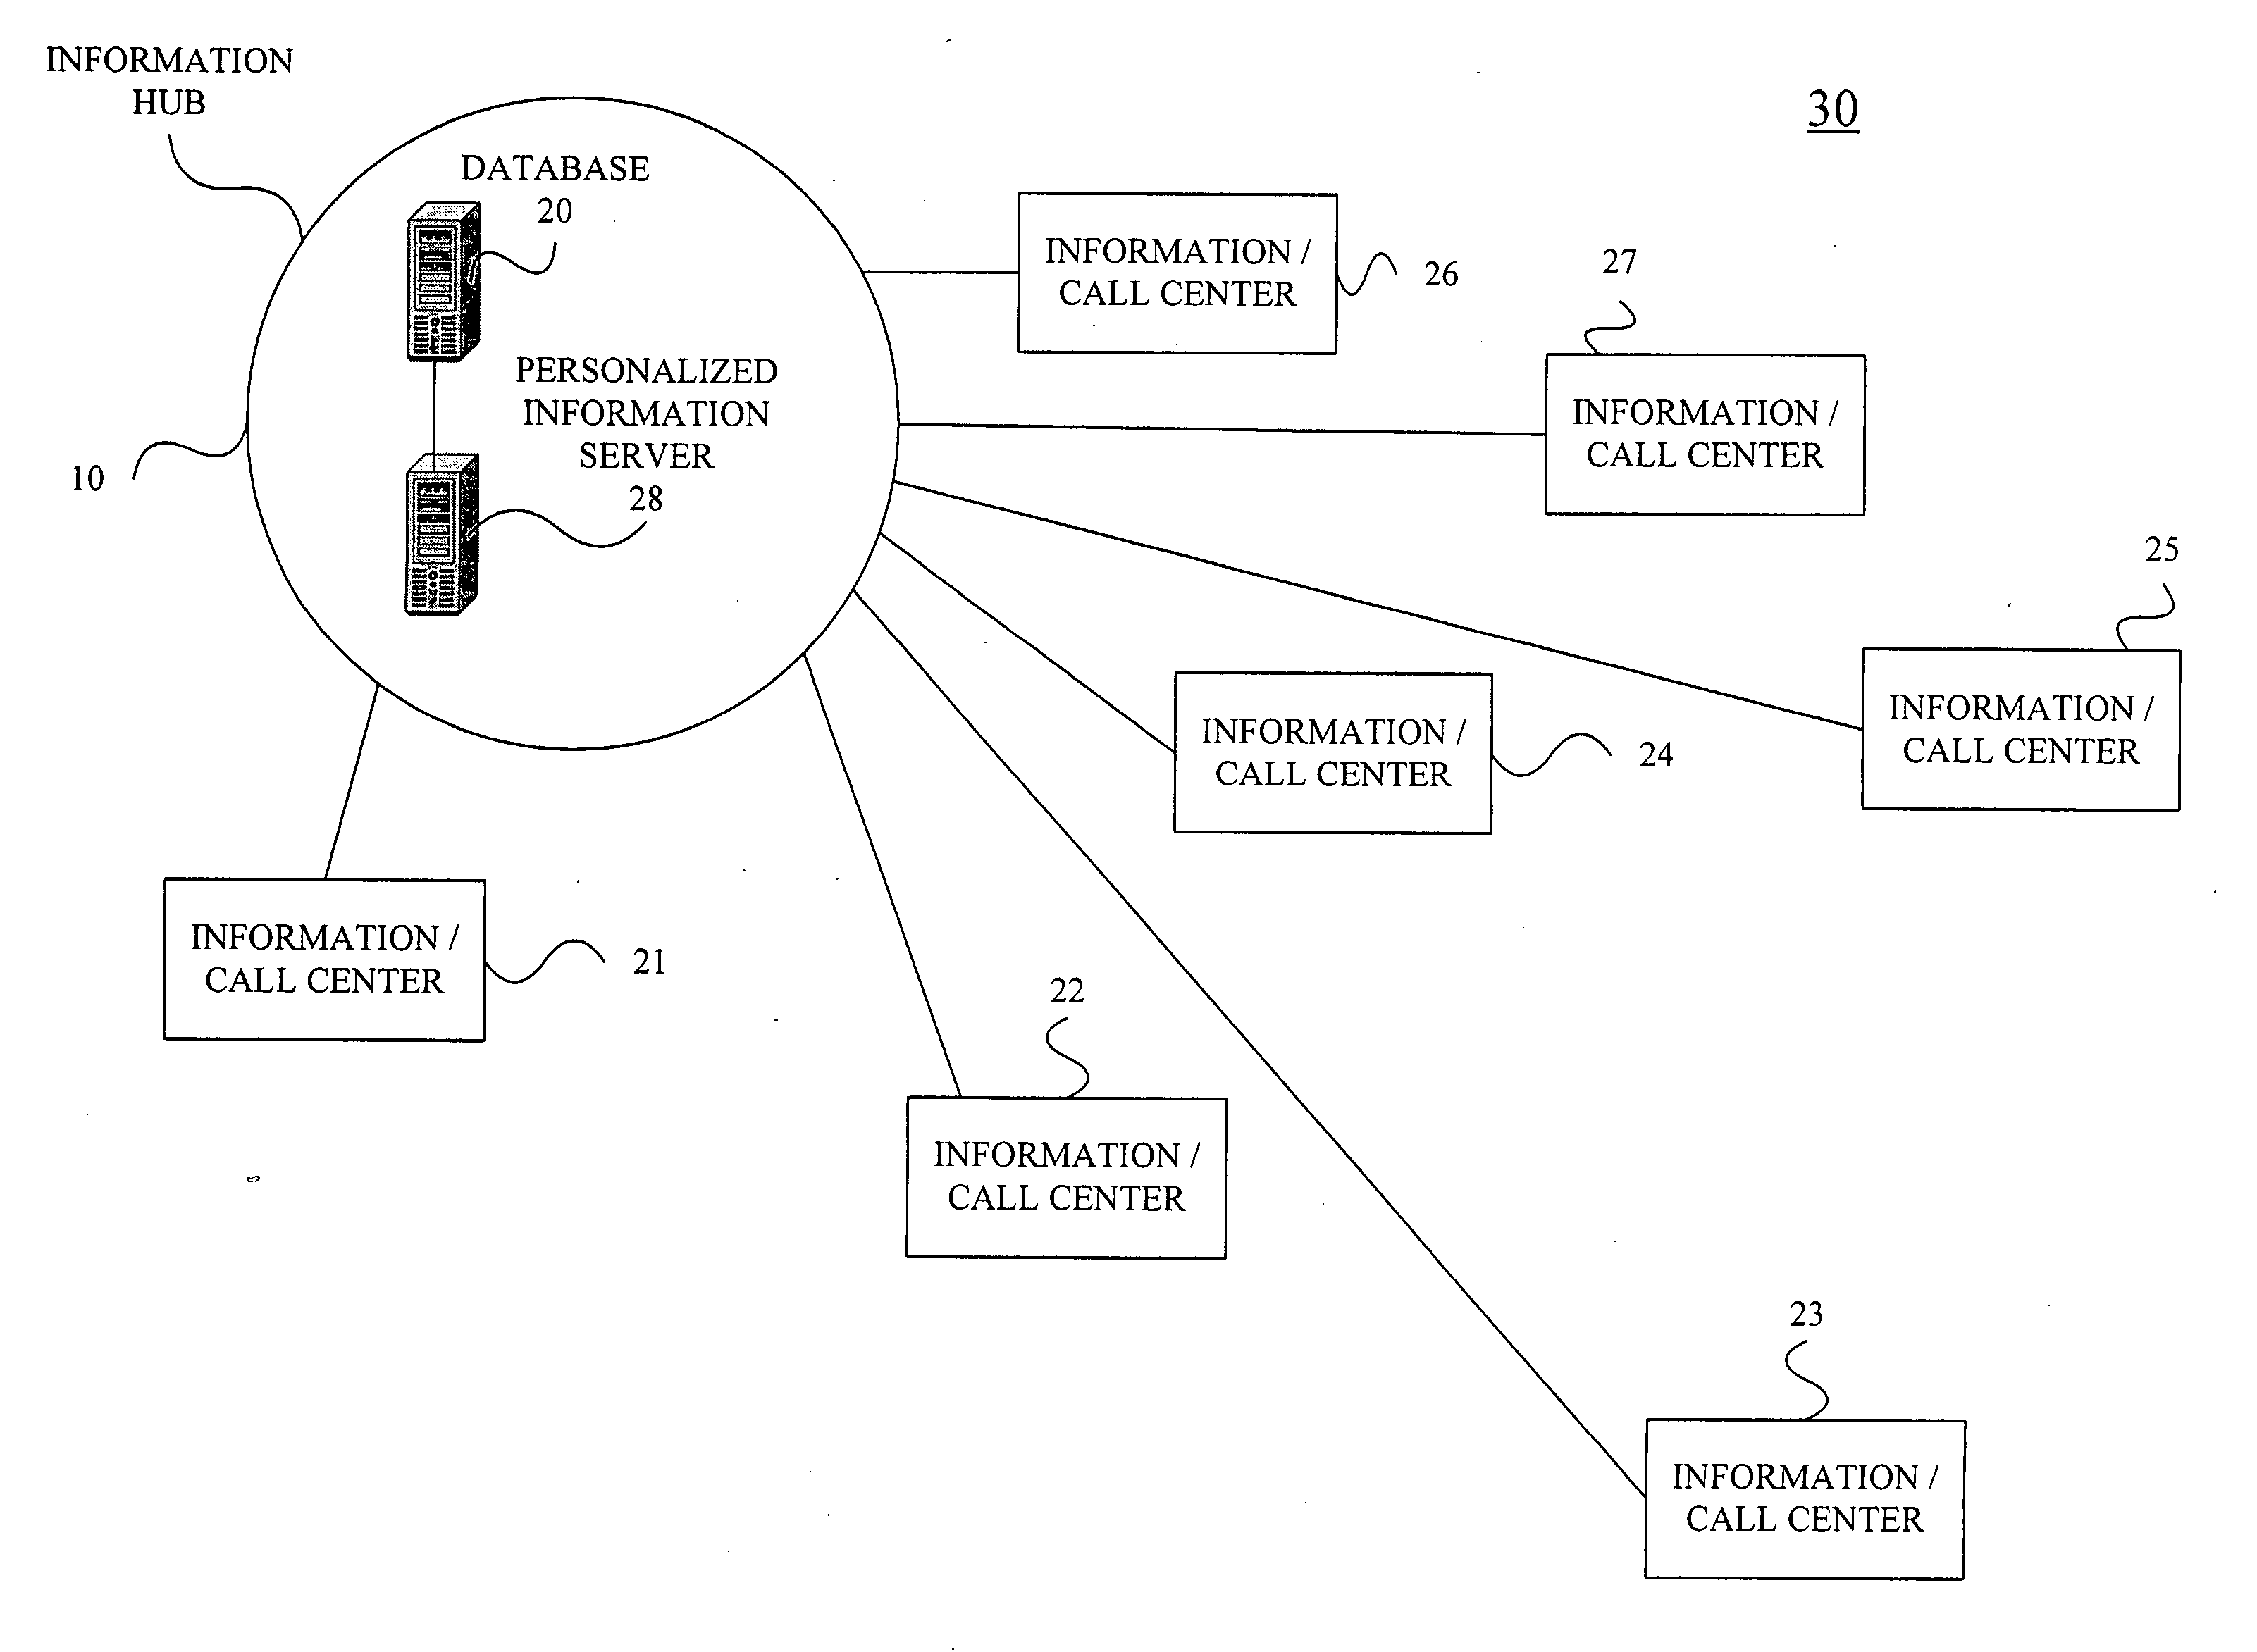 Technique for effectively assisting a user during an information assistance call